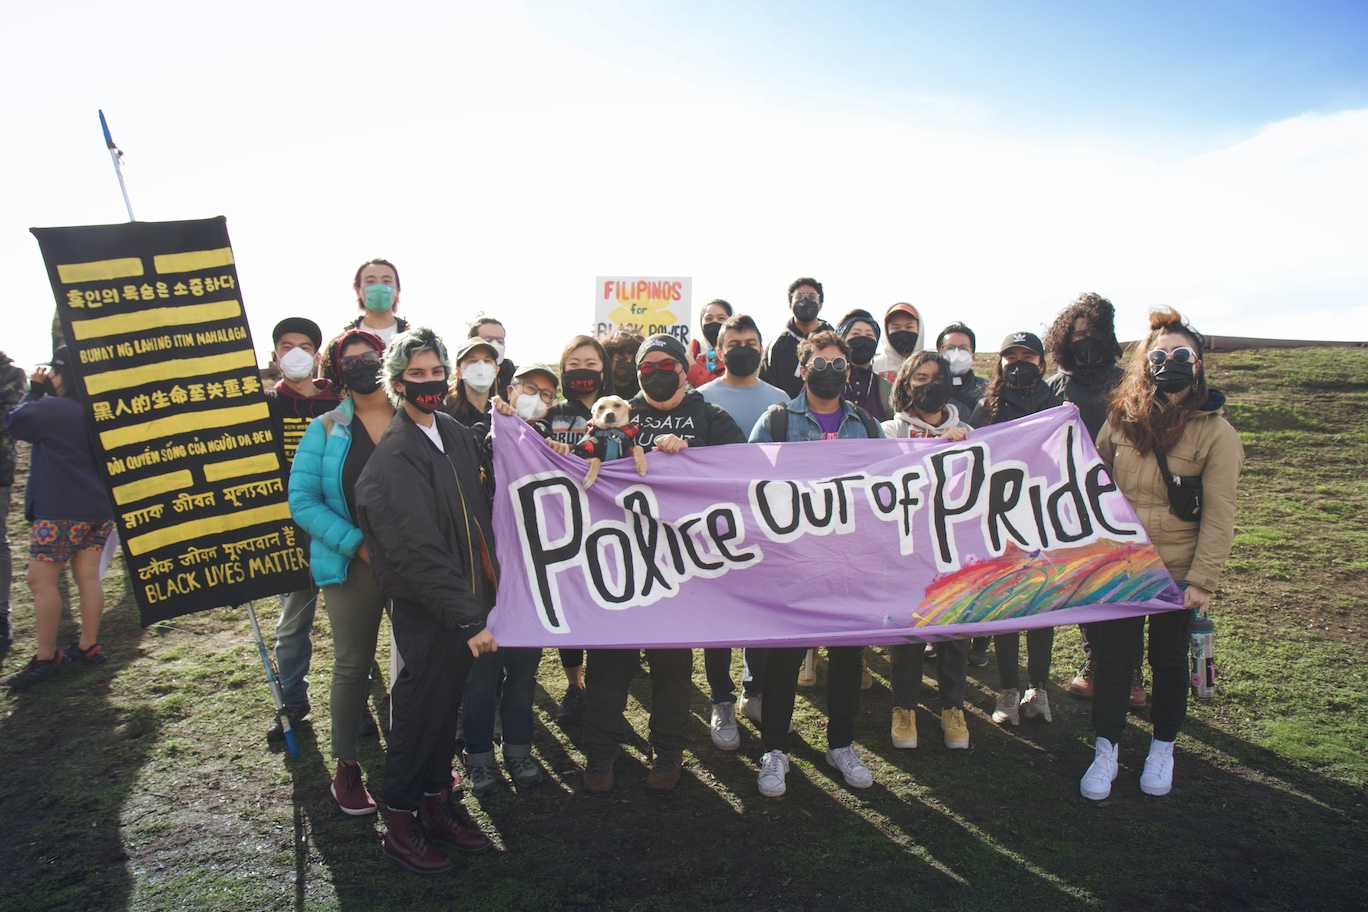 Image Description: A group of masked trans and queer Asian and Pacific Islander people hold a large purple banner that reads: Police Out of Pride. There is a black banner to the left that reads BLACK LIVES MATTER in multiple different languages.